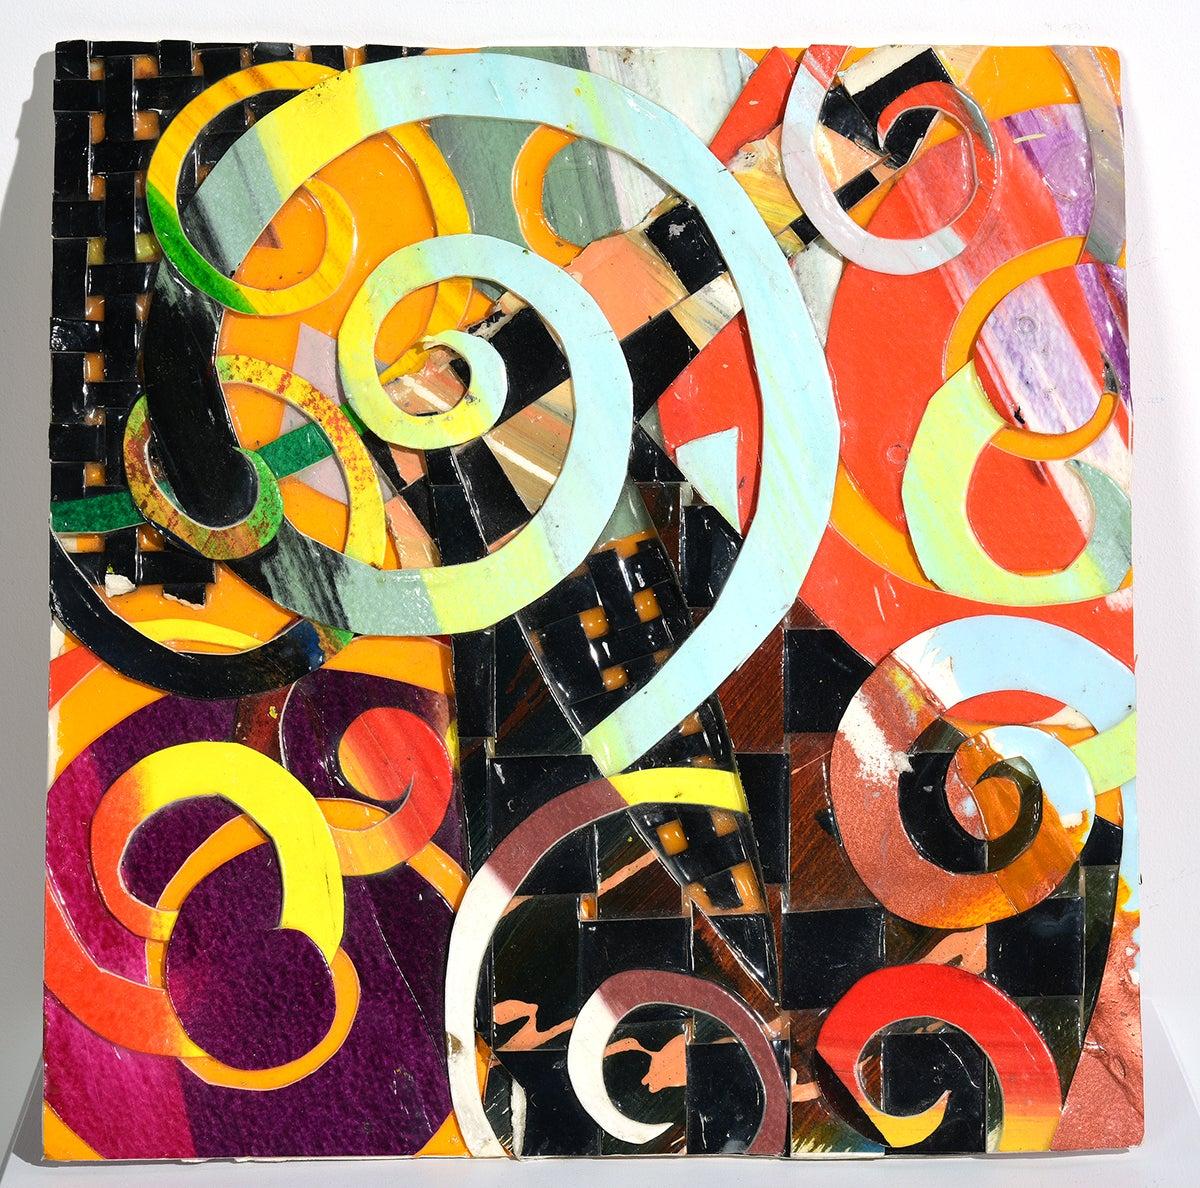 "Home #38" Multi-colors, Abstract, Brilliant, Swirl Motif, African-American - Mixed Media Art by Al Loving